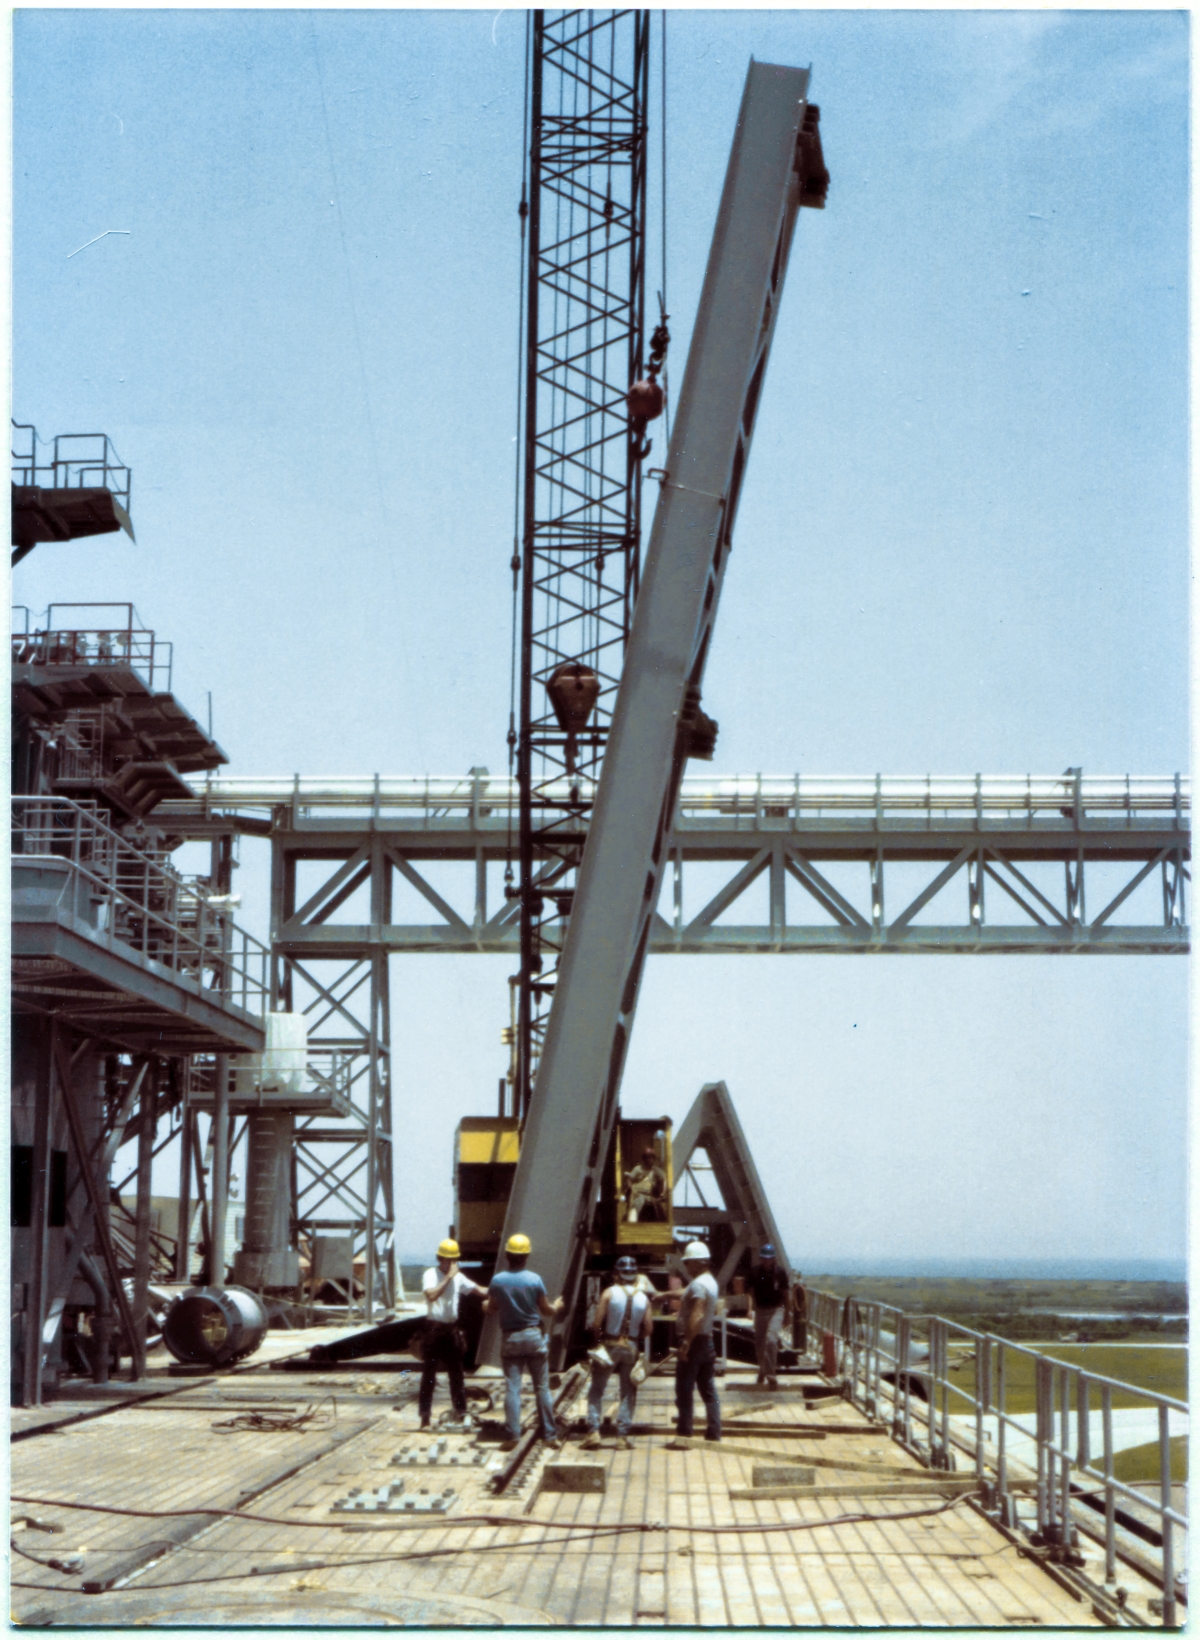 Image 077. The GOX Arm Strongback remains suspended just above the Pad Deck, still within easy reach, as our small group works out the precise arrangements which will need to be effected from here on, as the Strongback rises above the ground, far out of reach, until it arrives at its destination on the Fixed Service Structure, 250 feet straight up from the Pad Deck it now hangs less than a yard above. For the moment, it is rotated 180 degrees away from its final orientation, flush against the Primary Framing on side 1 of the FSS, extending from elevation 260'-0” to 300'-0”. During lifts, orientations of that which is being lifted do not necessarily match their final orientations, and this can be for any number of reasons, most of which are only apparent to those persons directly involved in the lift, and none of which might be visually apparent to an untrained or uninvolved observer. Photo by James MacLaren.